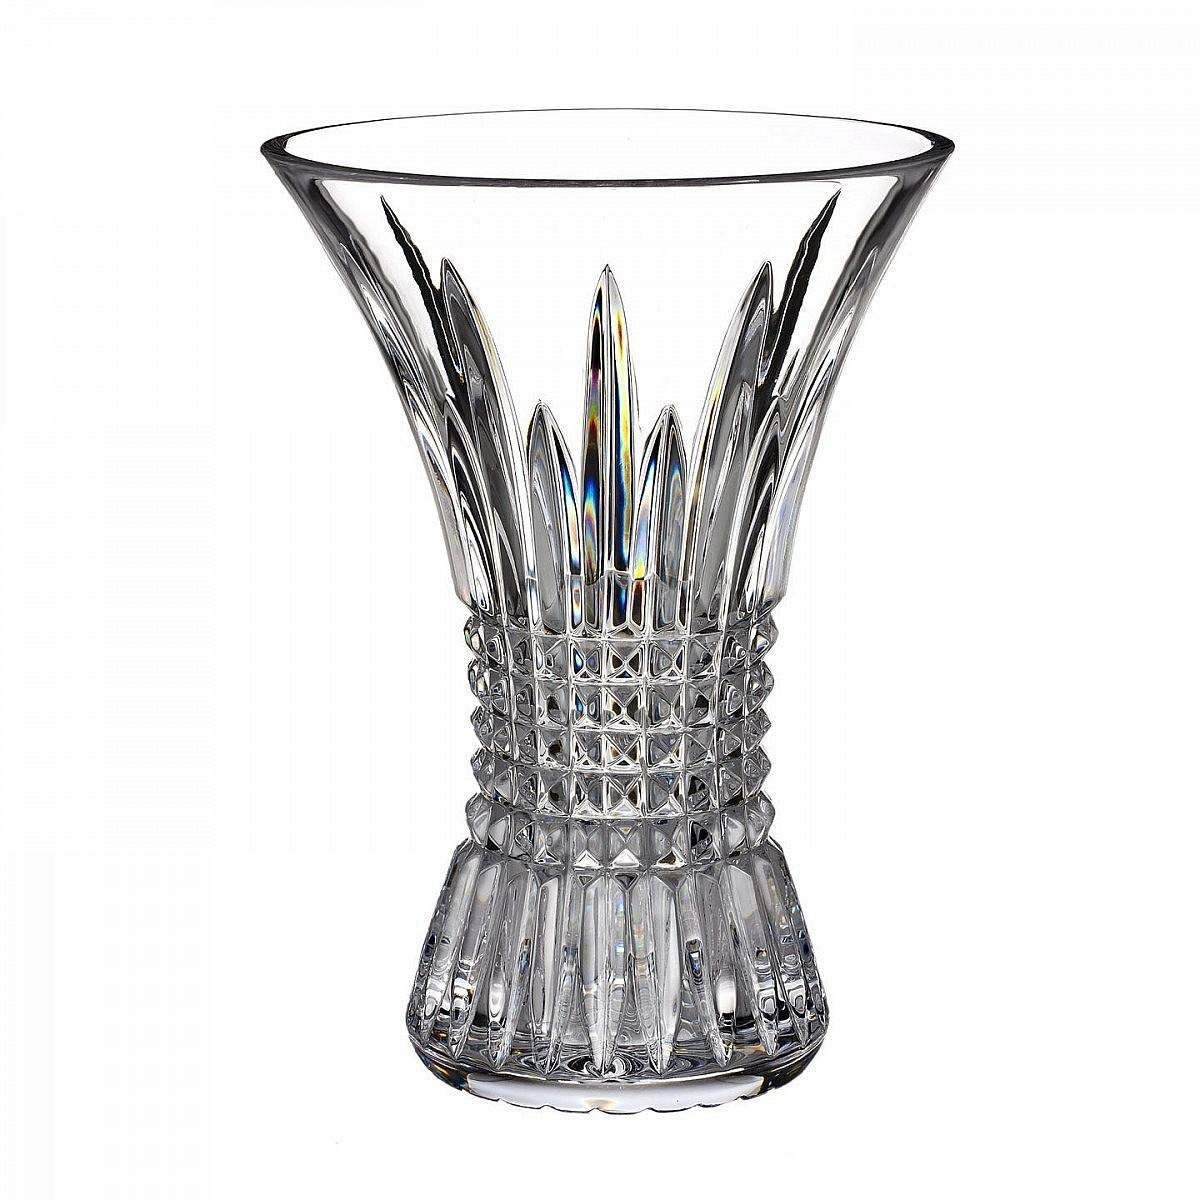 marquis by waterford sheridan flared 11 crystal vase of amazon com waterford lismore diamond 8 vase home kitchen for 71yaq7gzlel sl1200